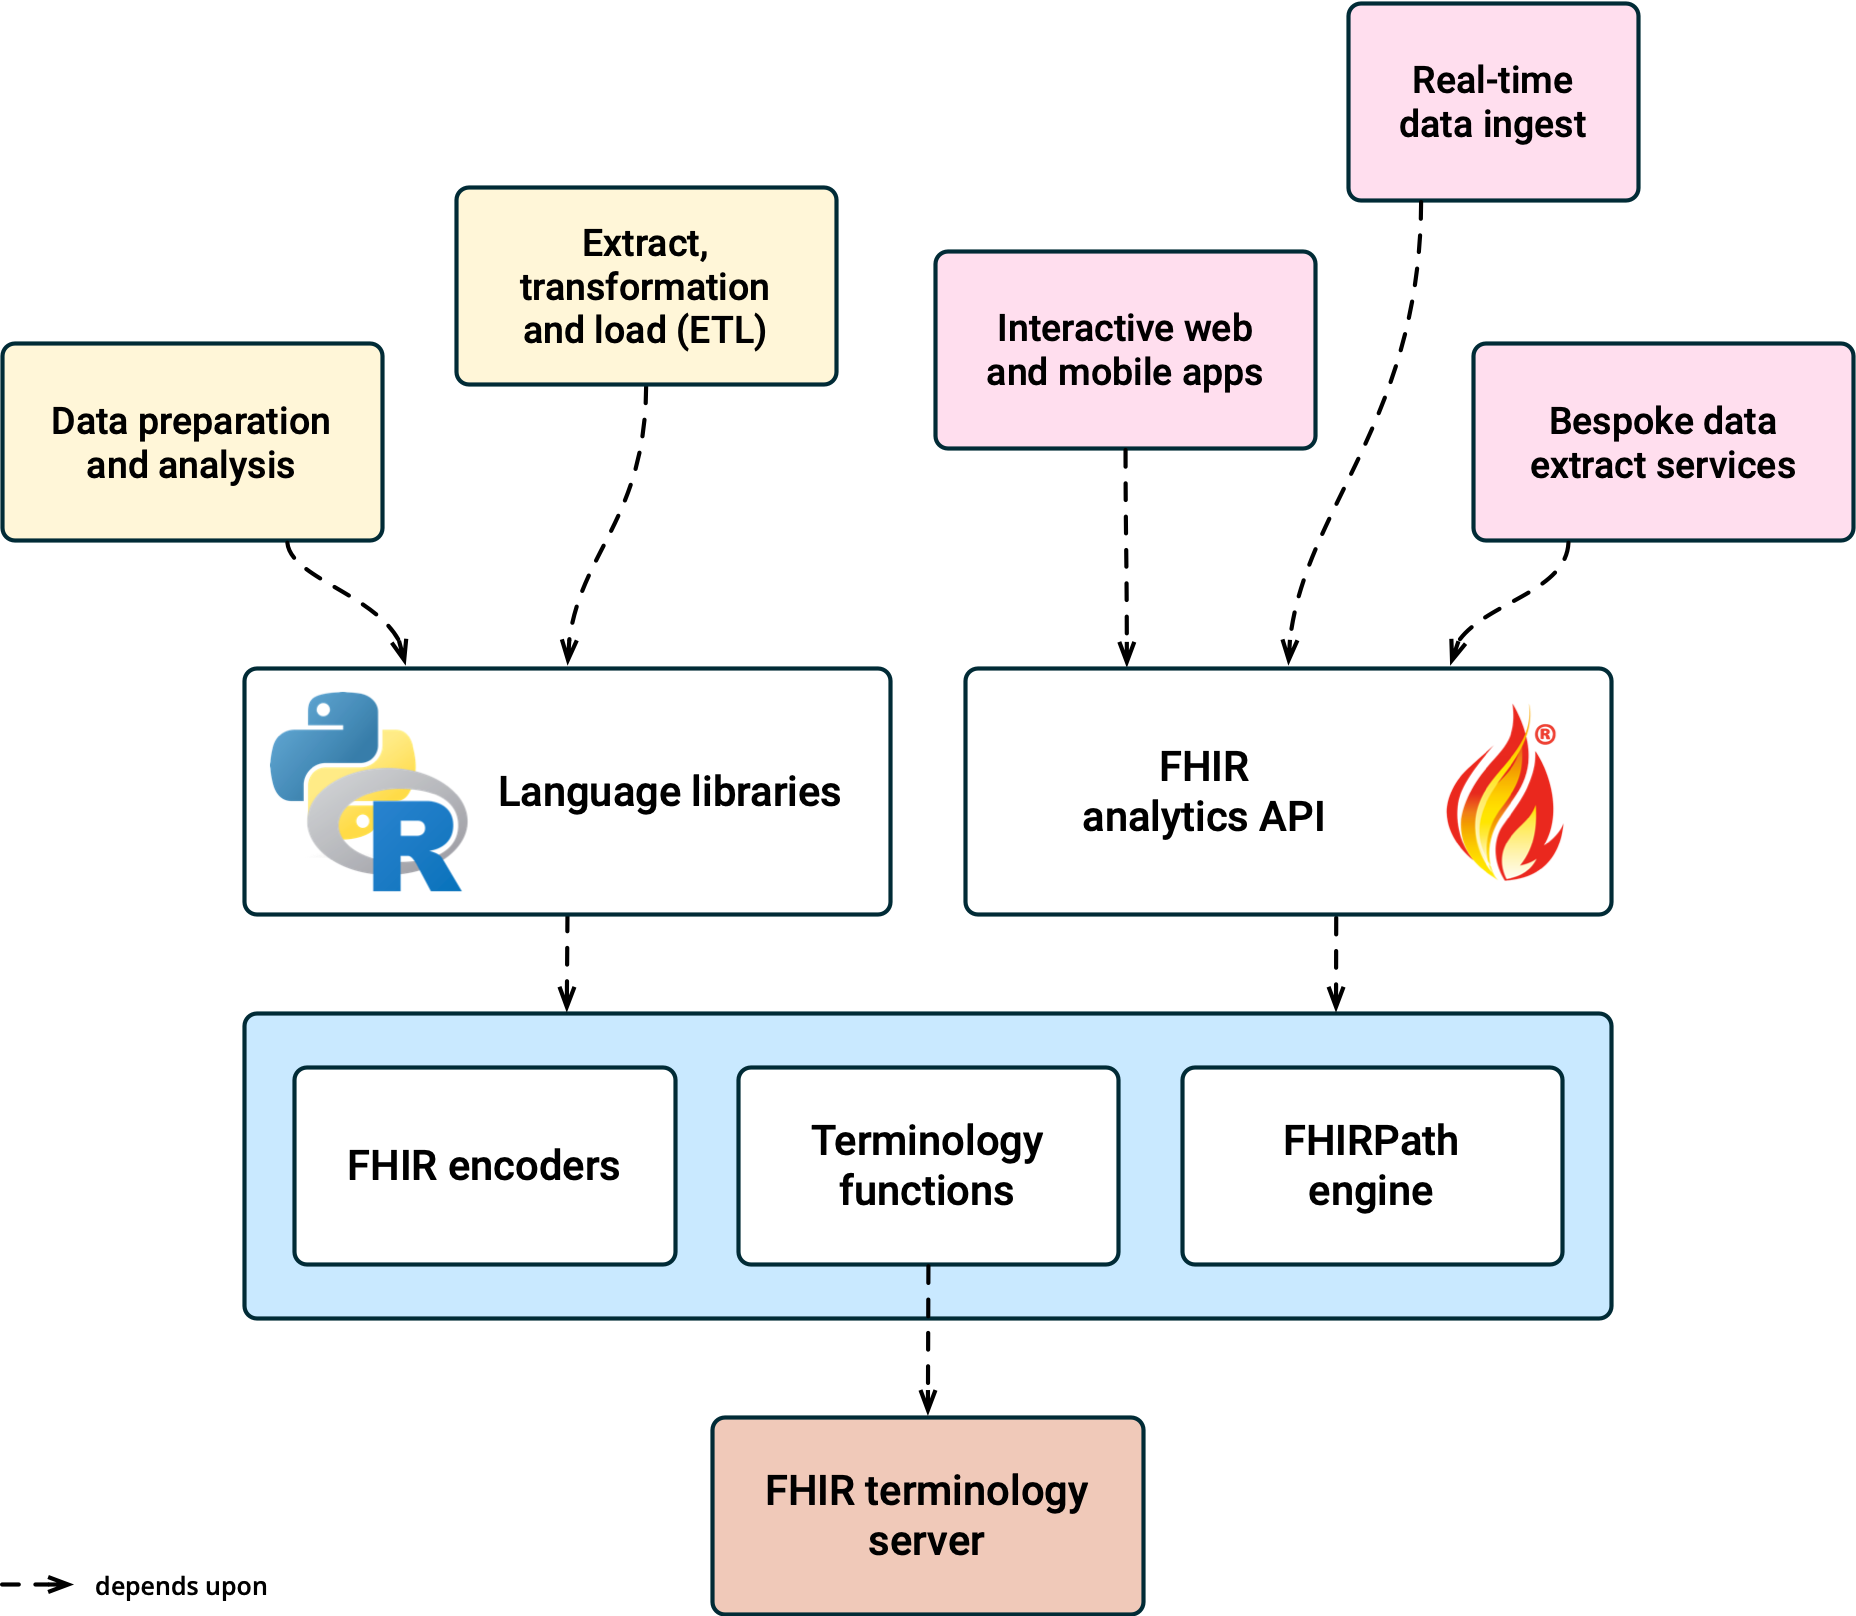 Components of Pathling (i.e. language libraries and server) and the associated use cases, including data prep, ETL, apps and data extract services